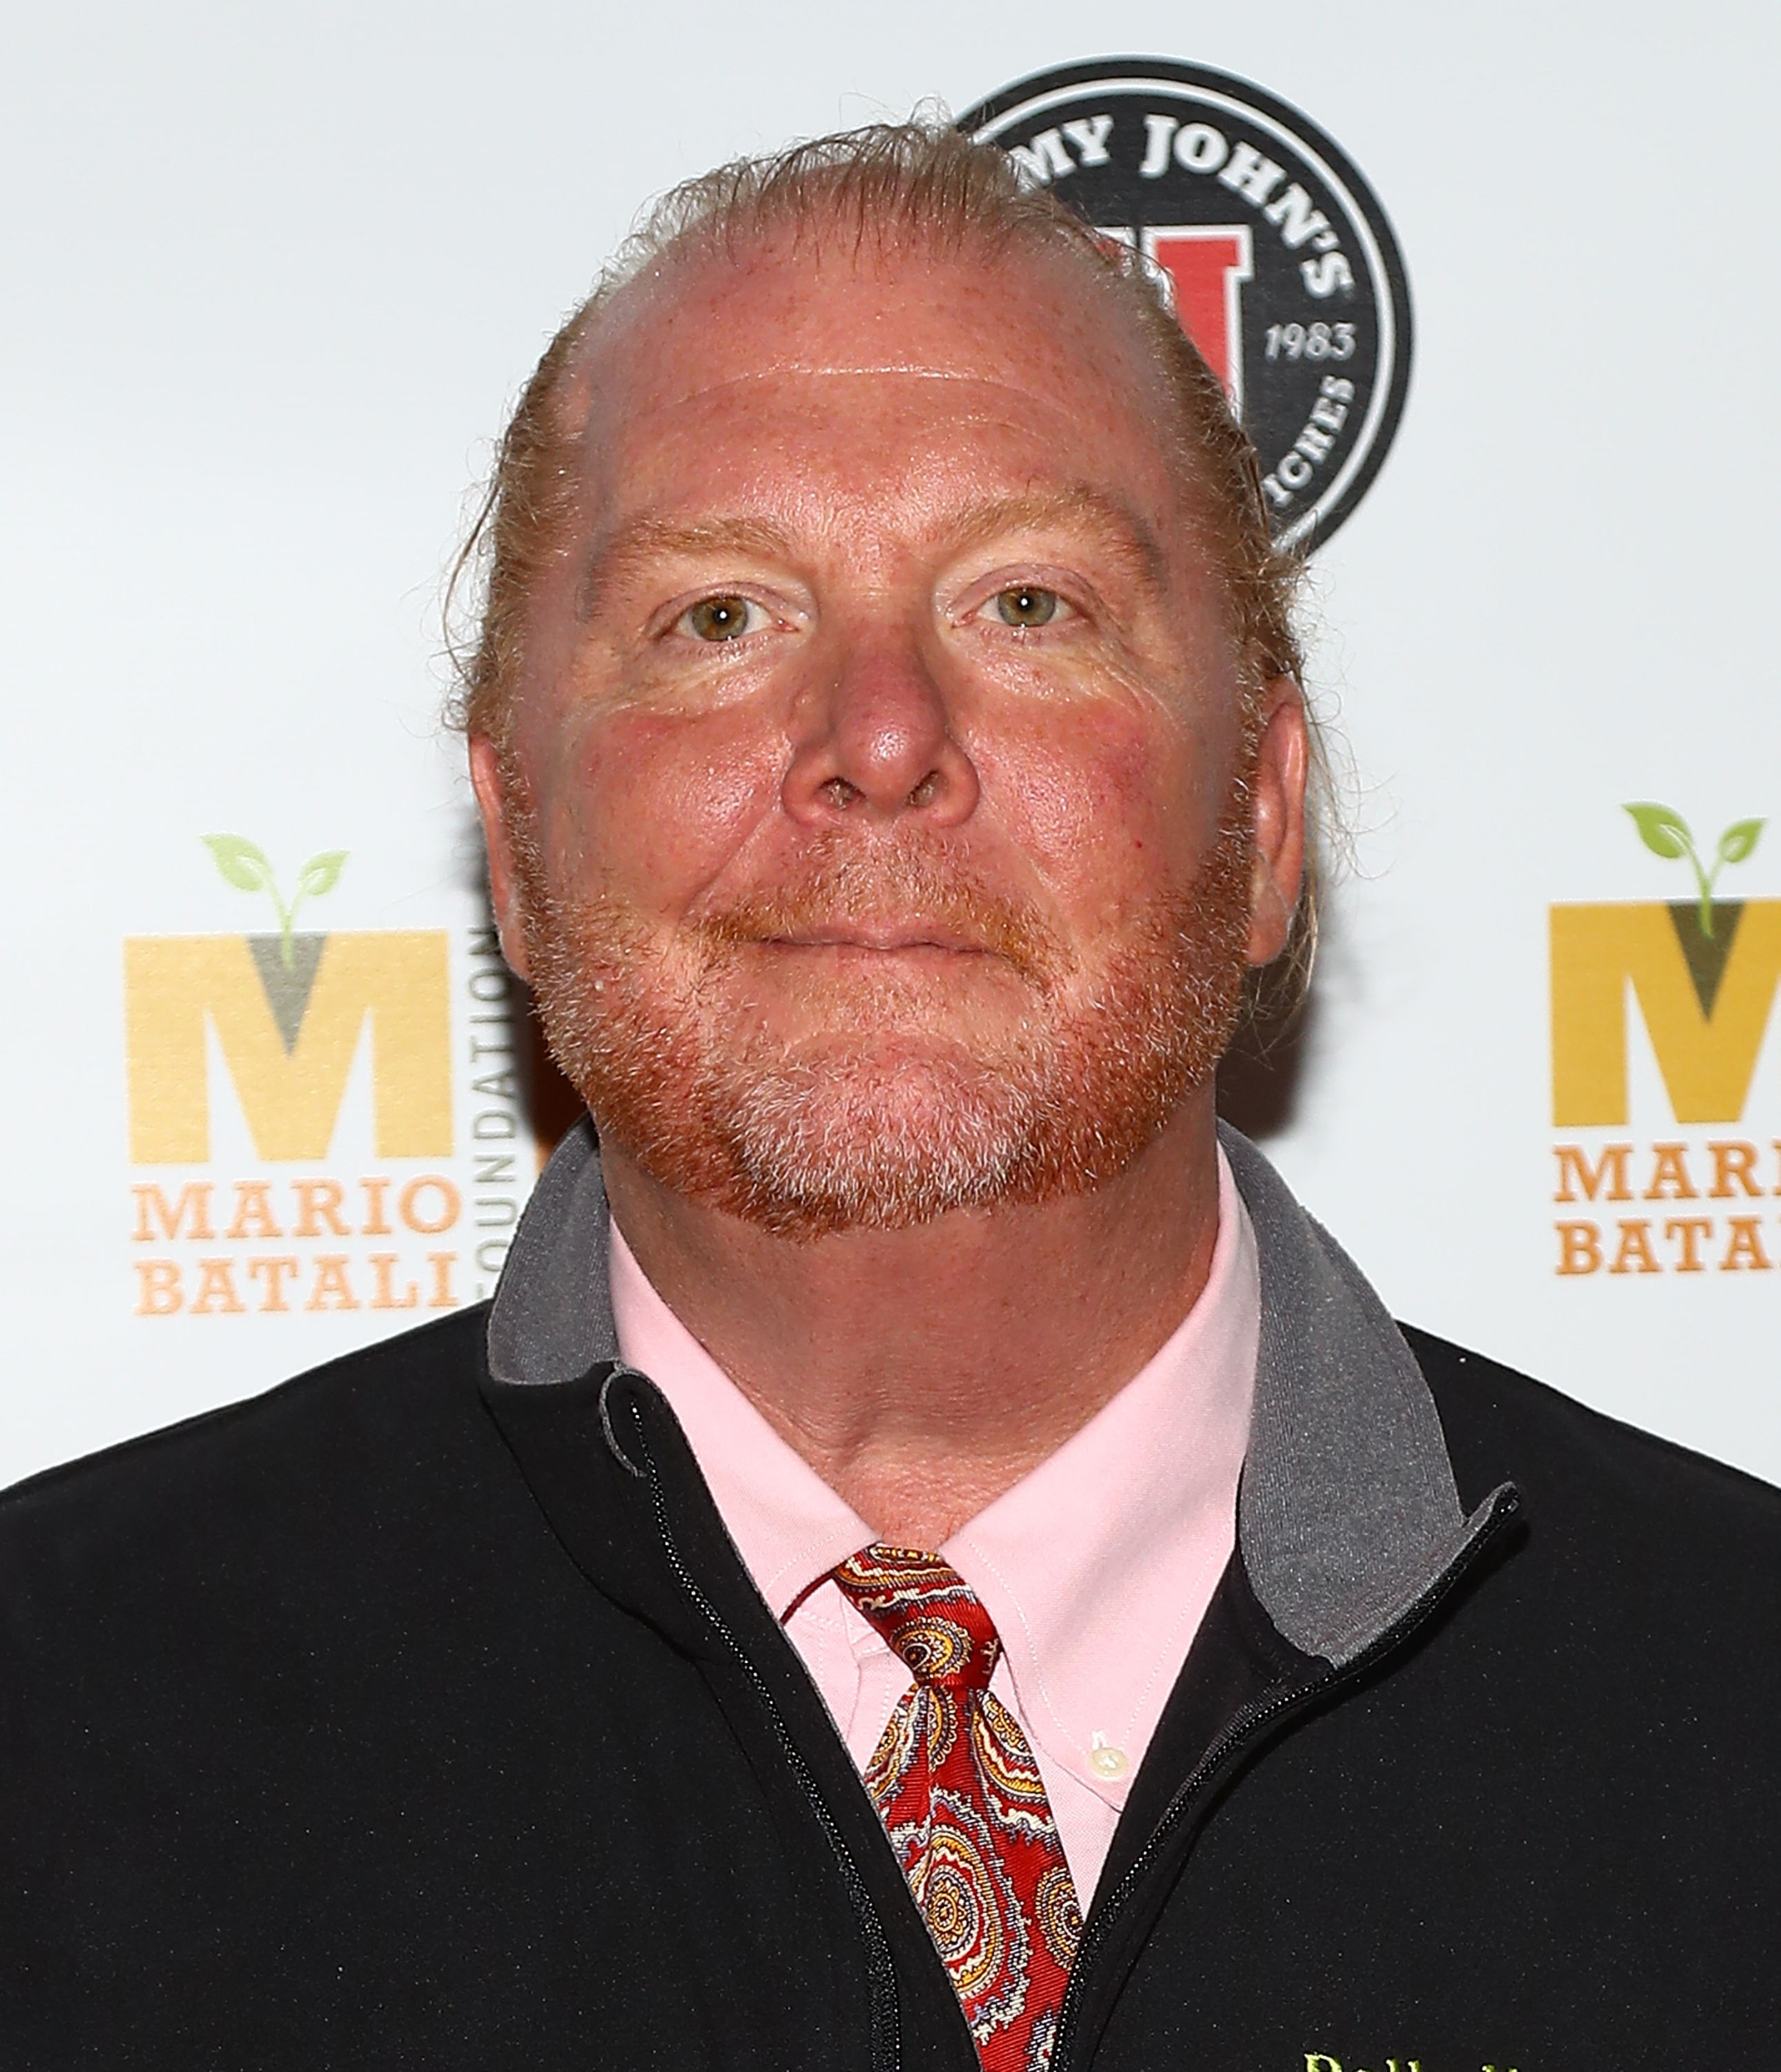 Chef Mario Batali attends a dinner for his foundation on Oct. 15, 2017 in New York City. Batali is reportedly under investigation by the New York Police Department for sexual misconduct (Astrid Stawiarz&mdash;Getty Images)